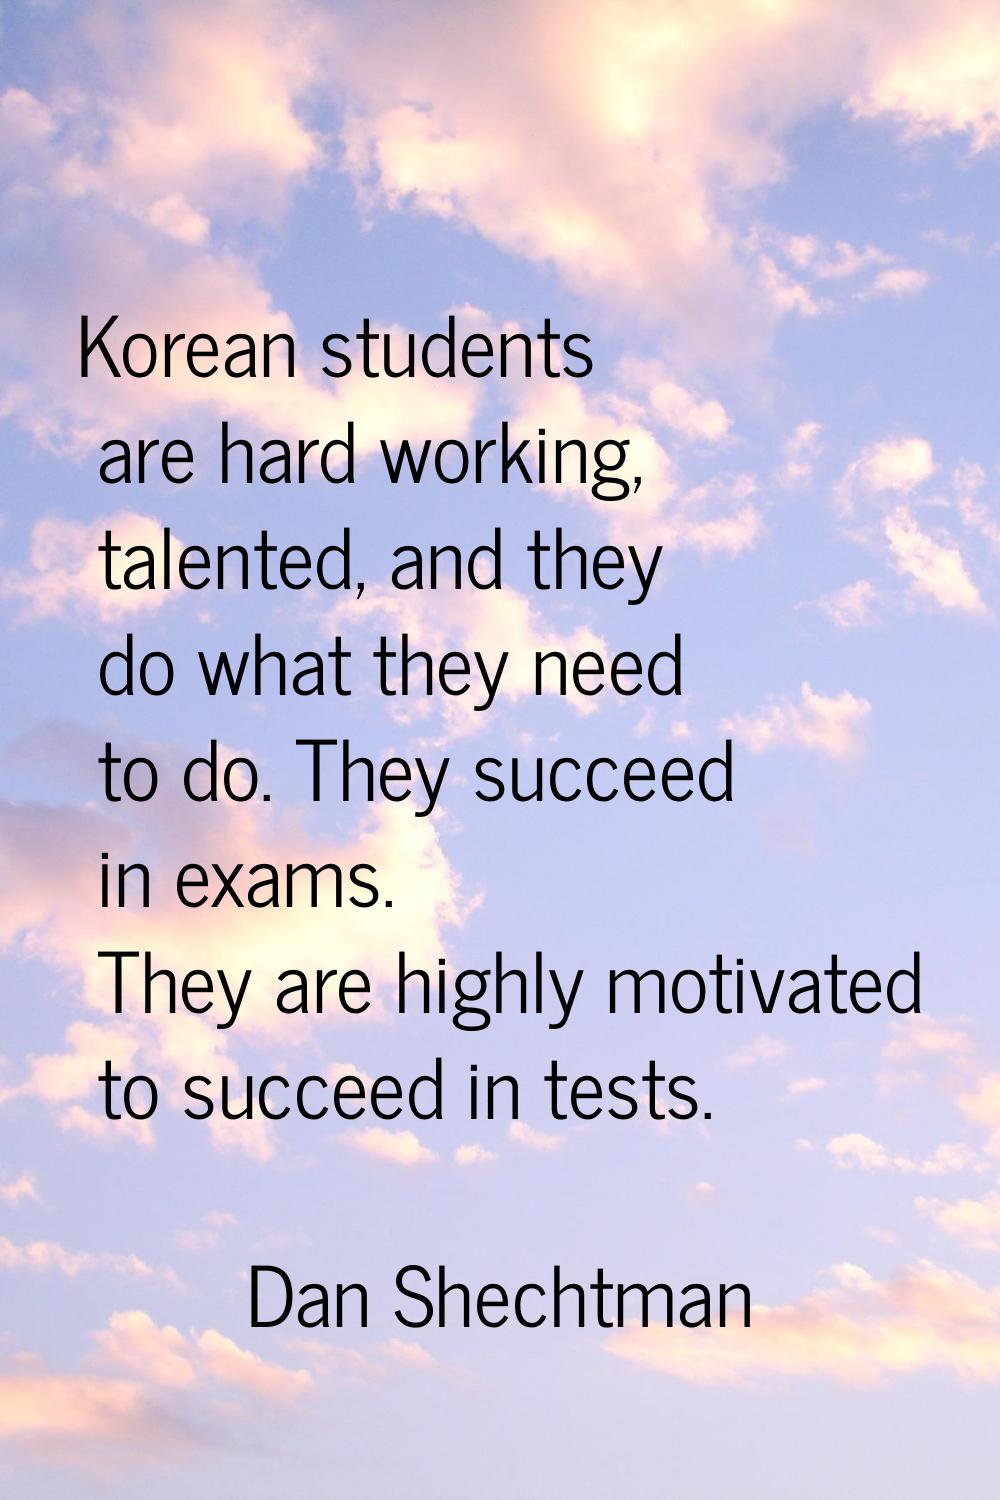 Korean students are hard working, talented, and they do what they need to do. They succeed in exams